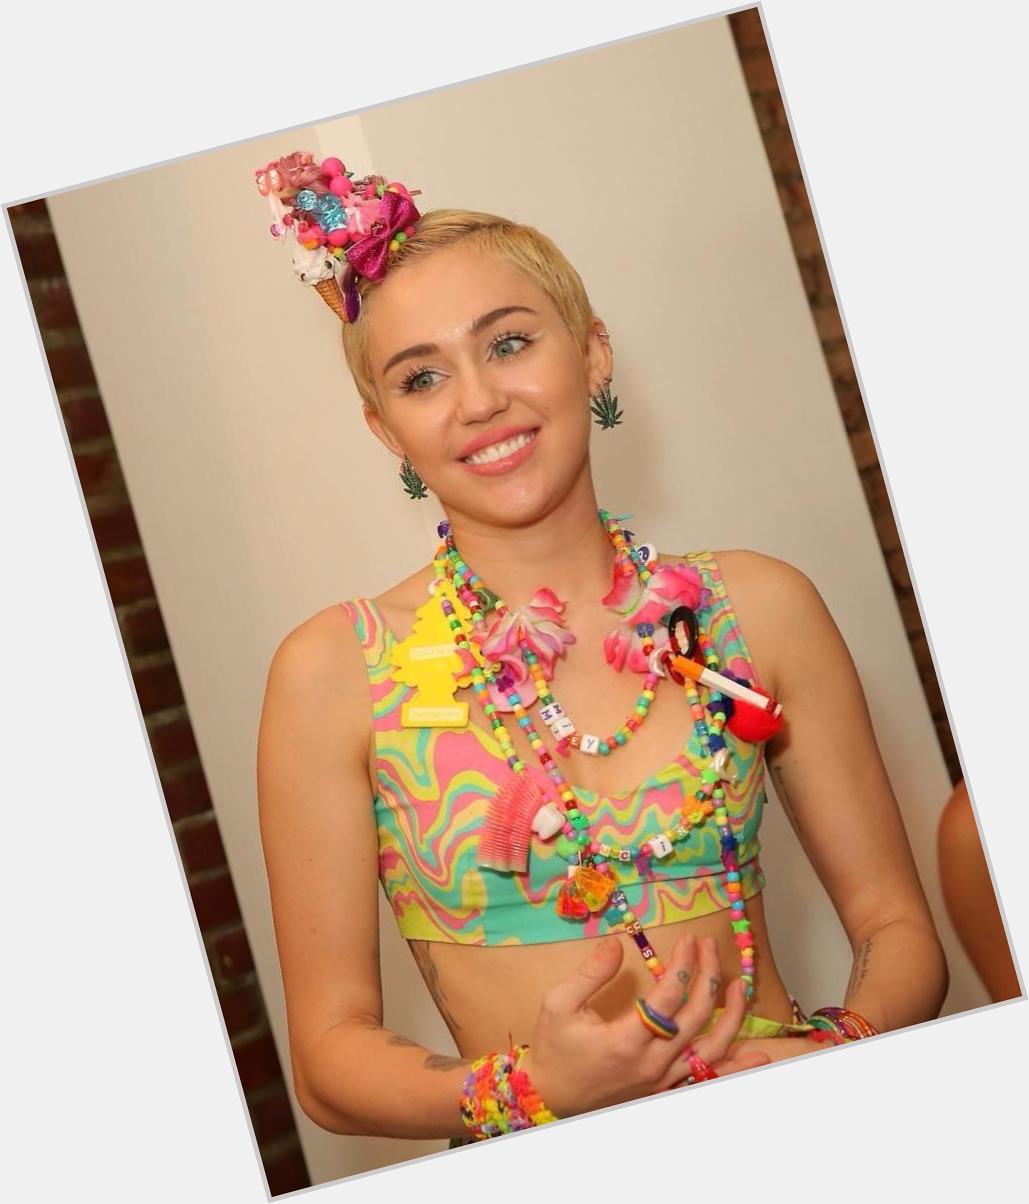 Happy Birthday Miley I am happy to listen to your music    Miley Cyrus 